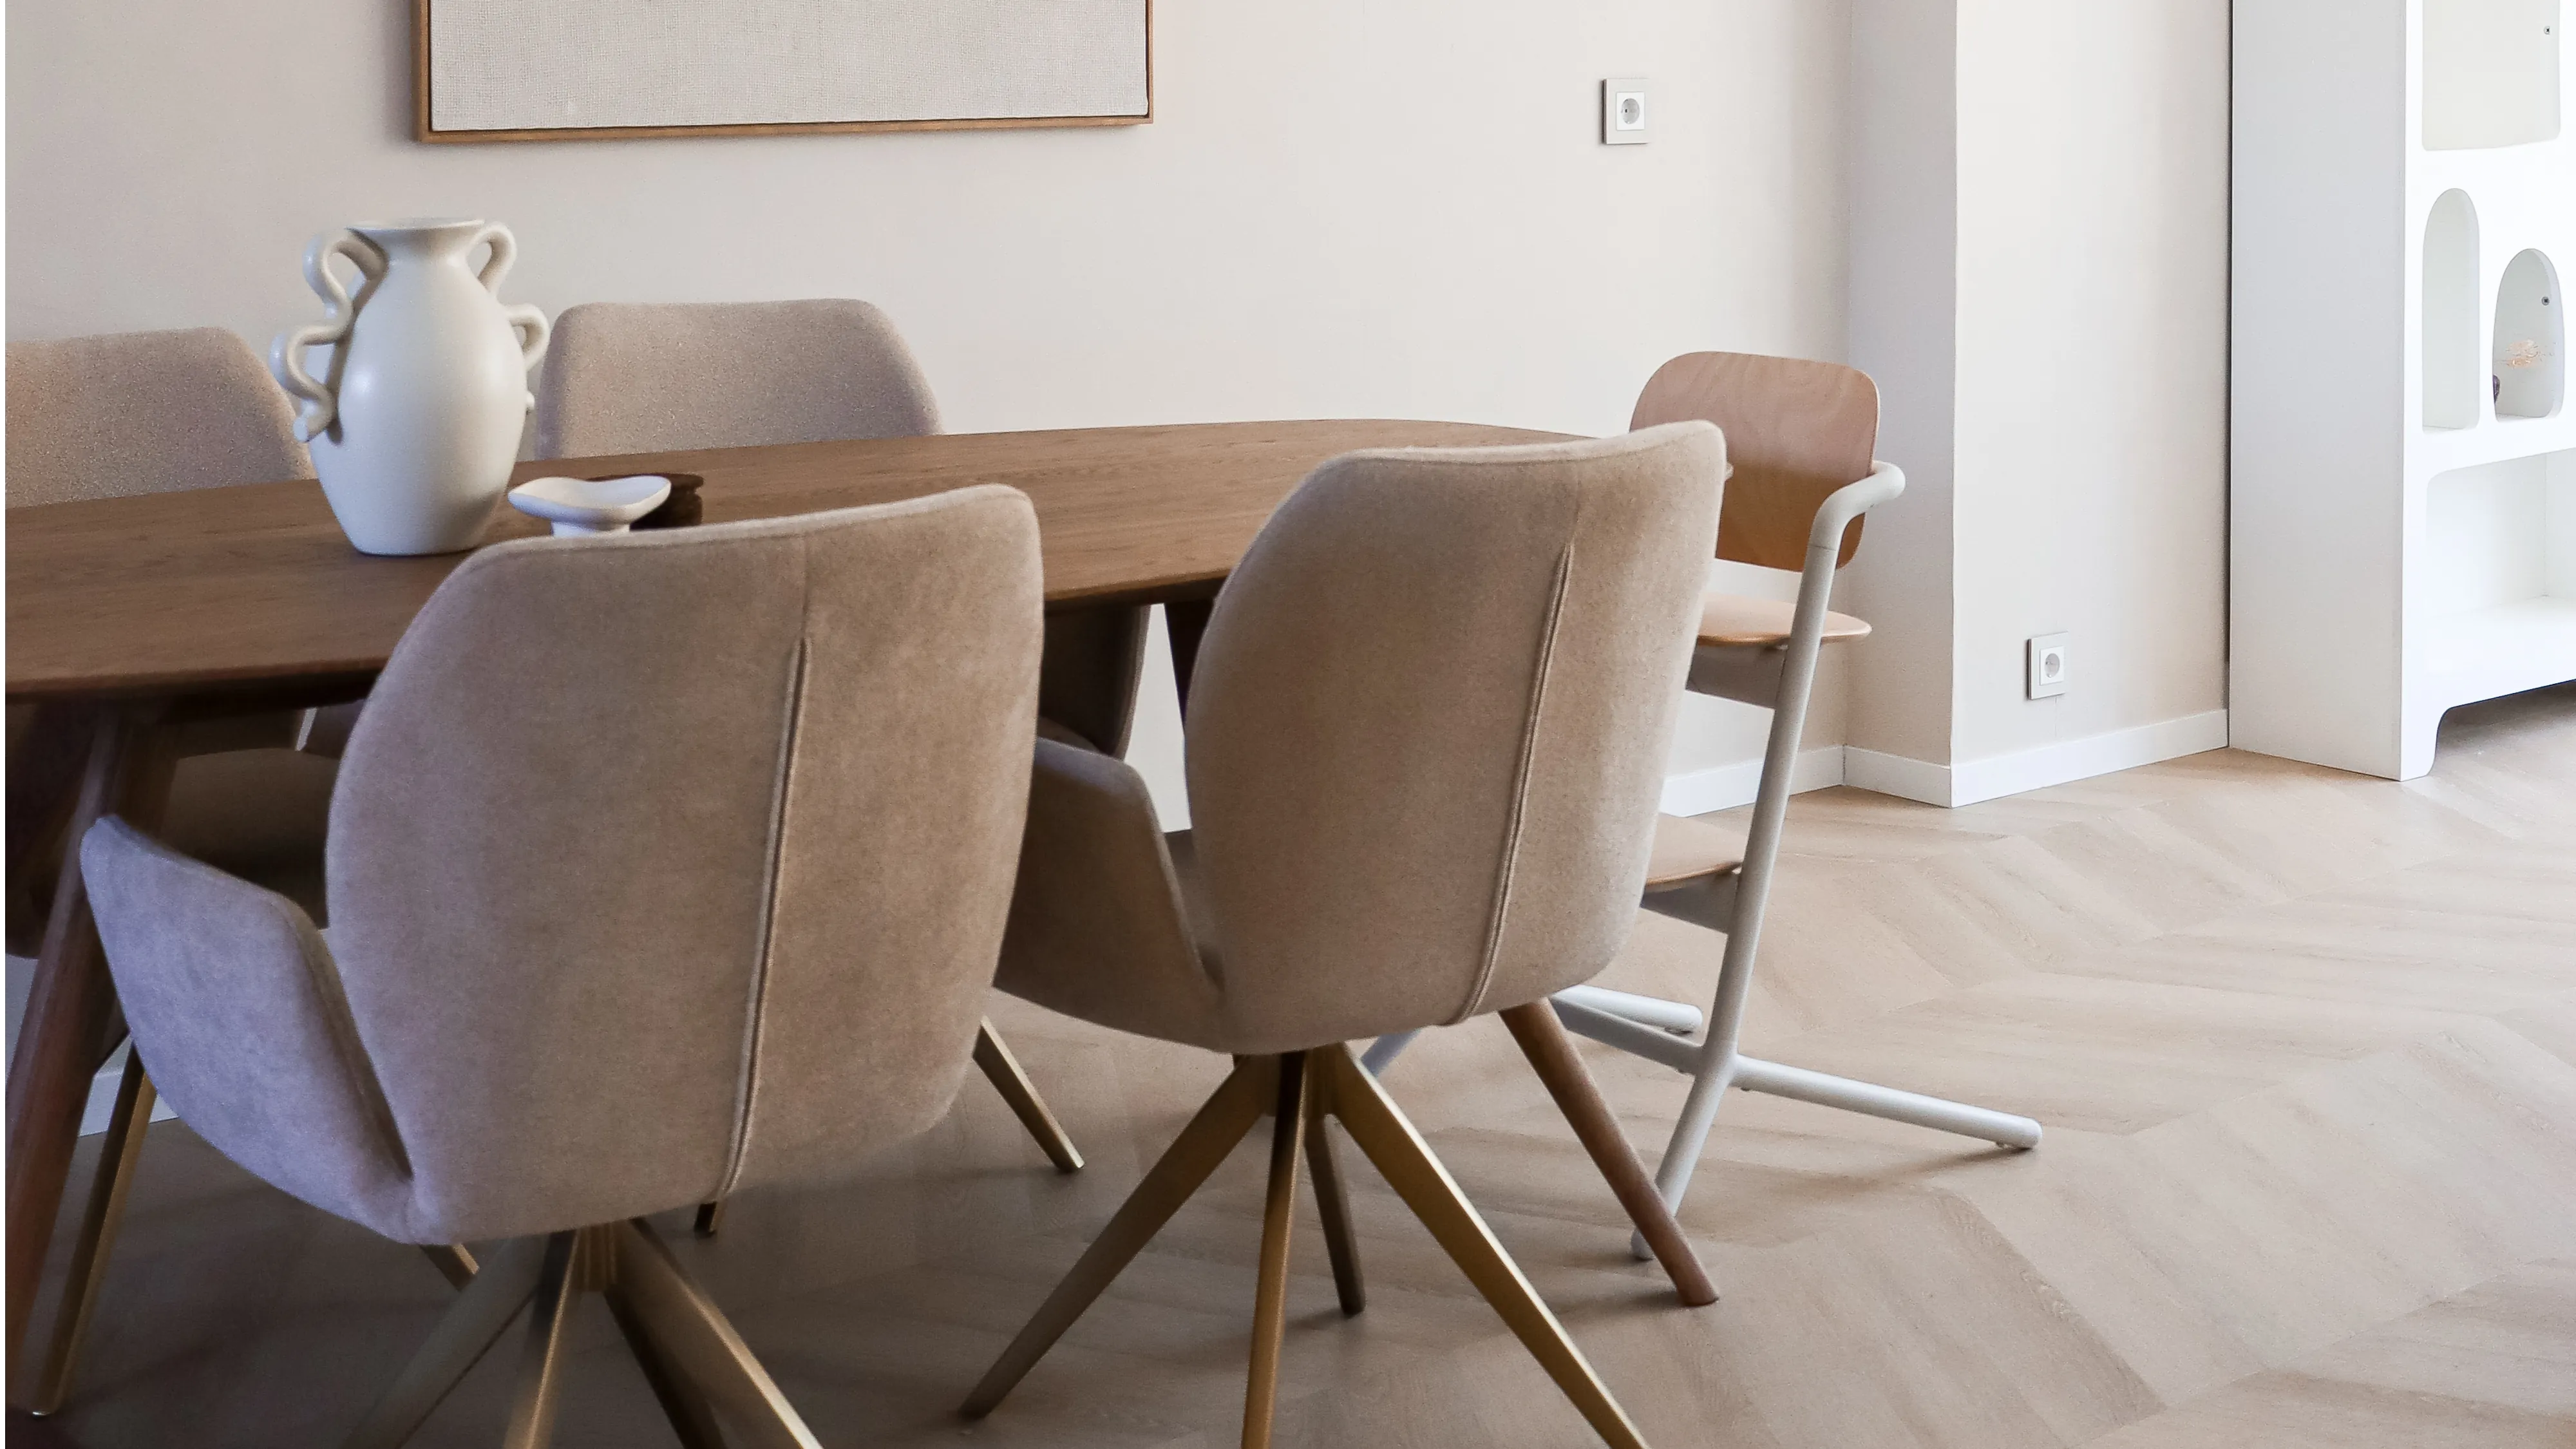 A minimalist dining room with a wooden table, beige chairs, and wall-mounted shelves, featuring subtle wall sockets and switches.